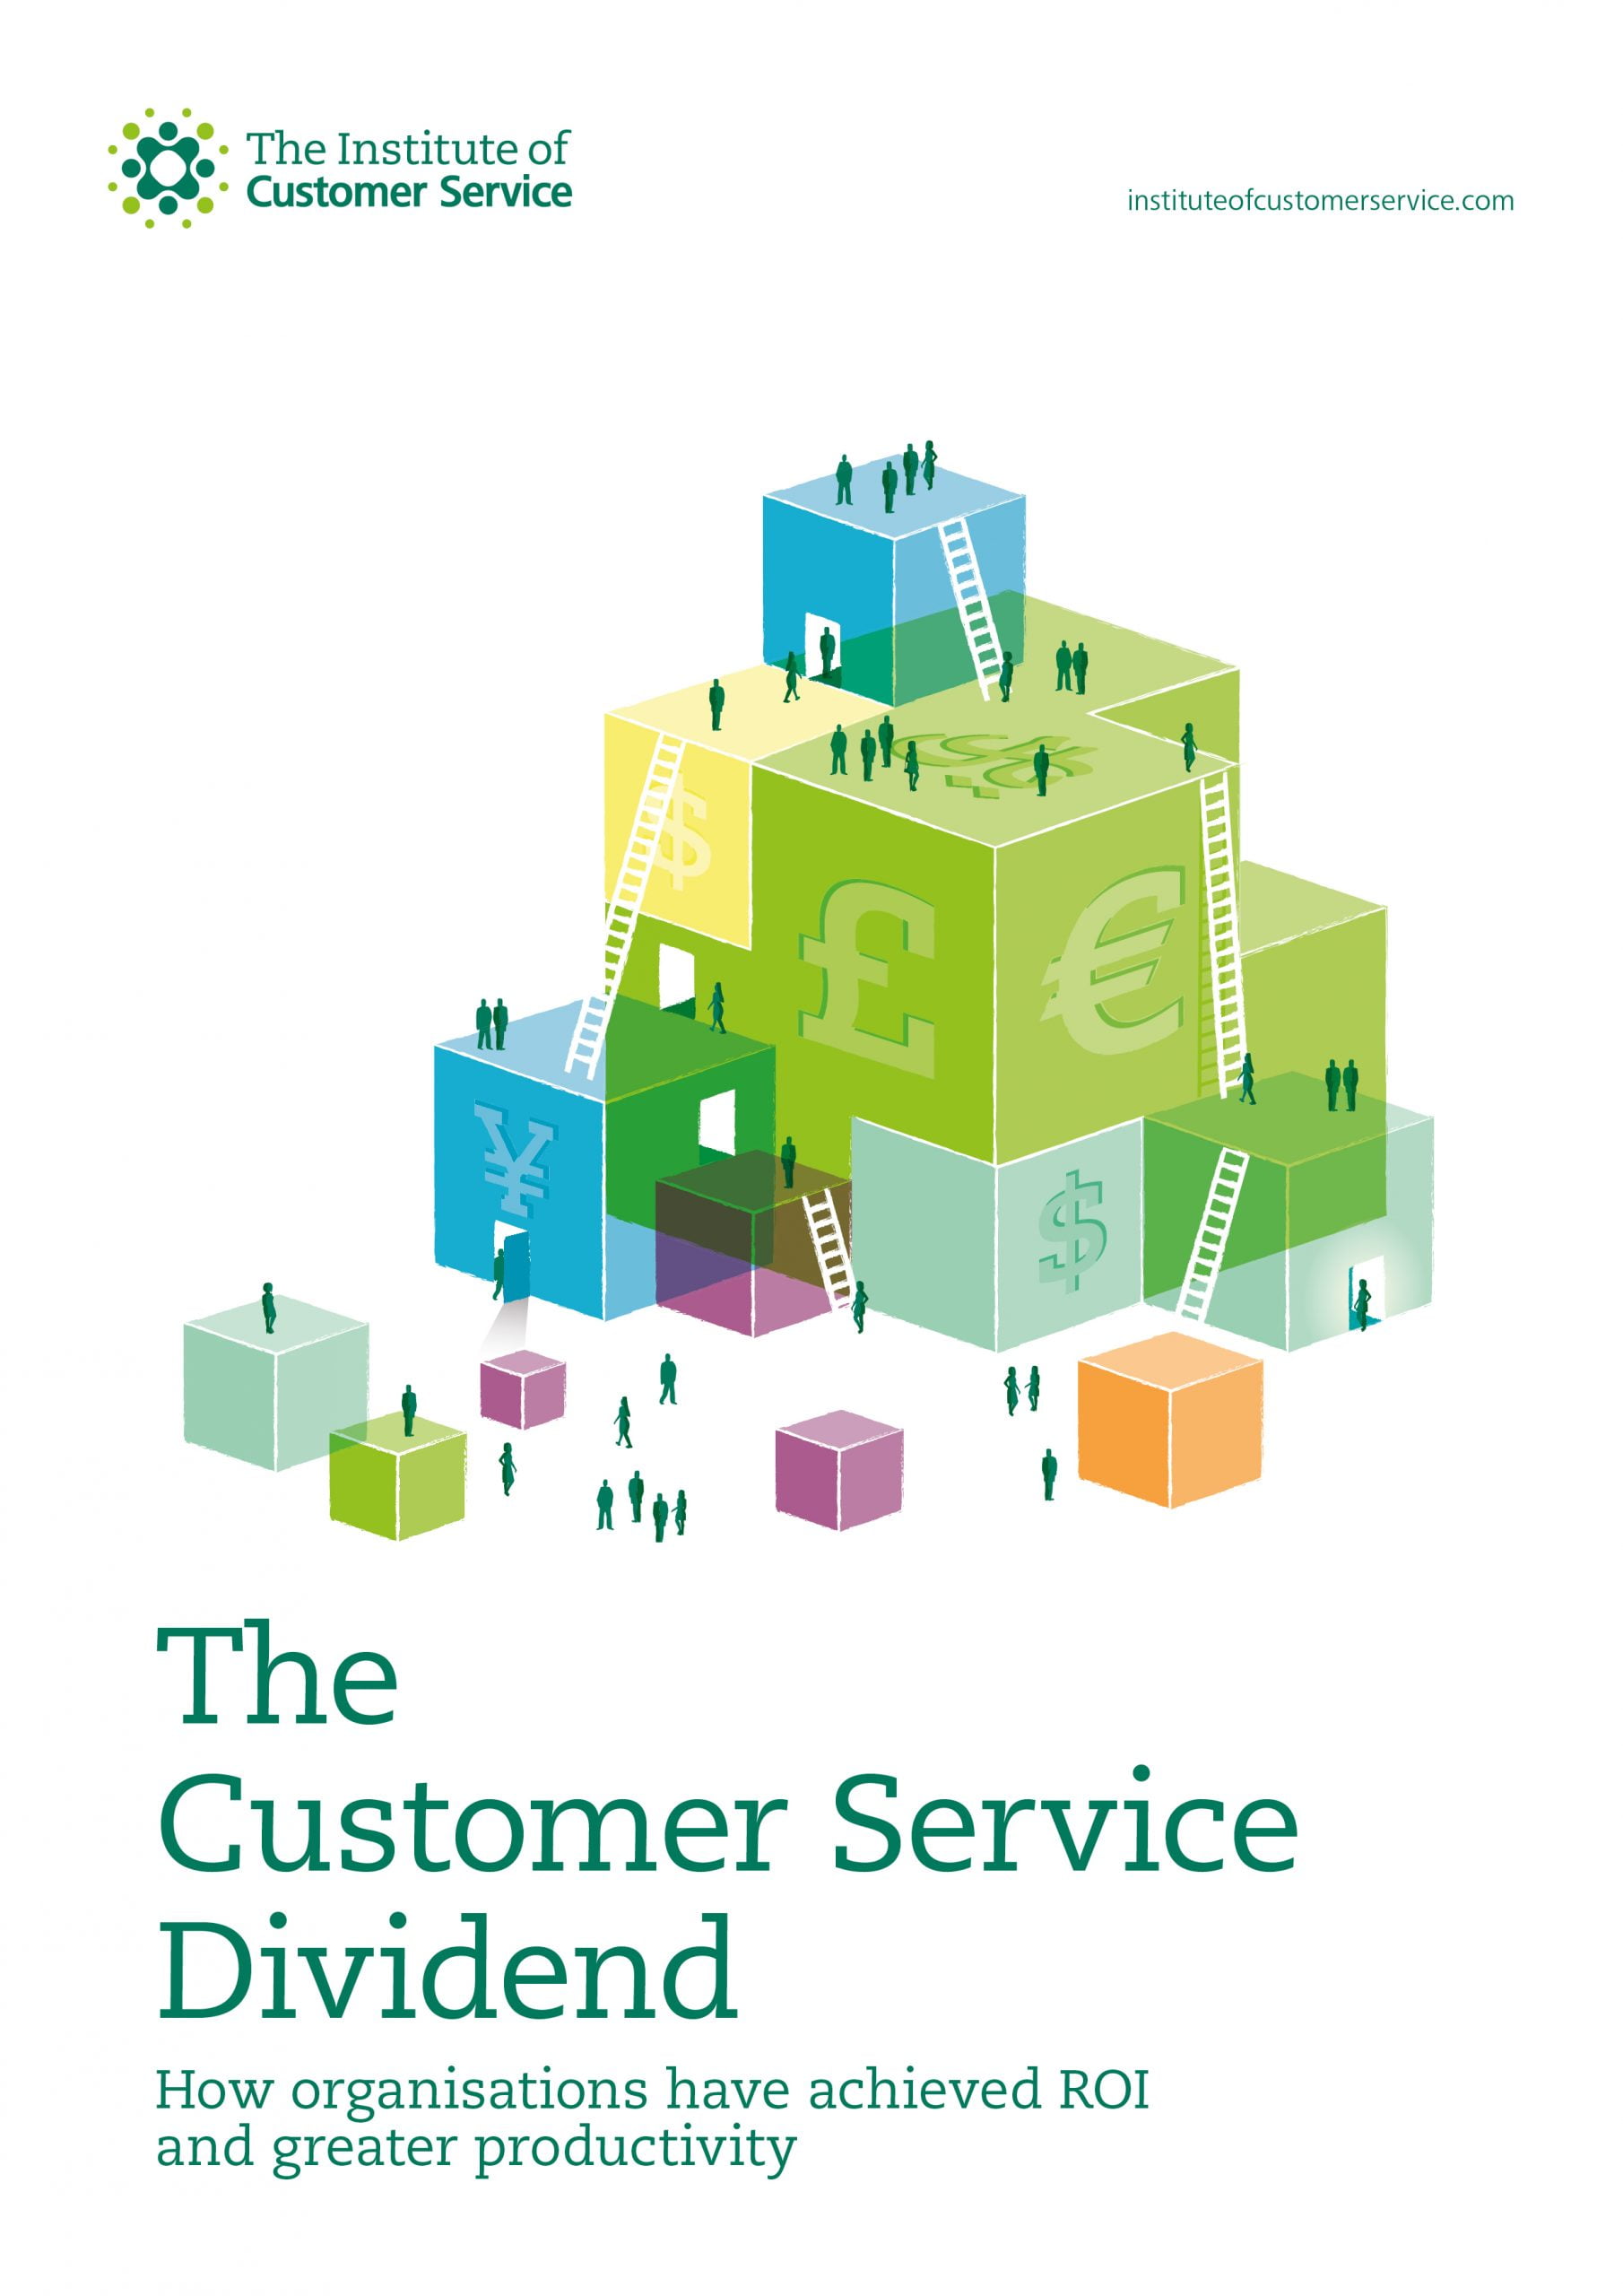 The Customer Service Dividend: How organisations have achieved ROI and greater productivity